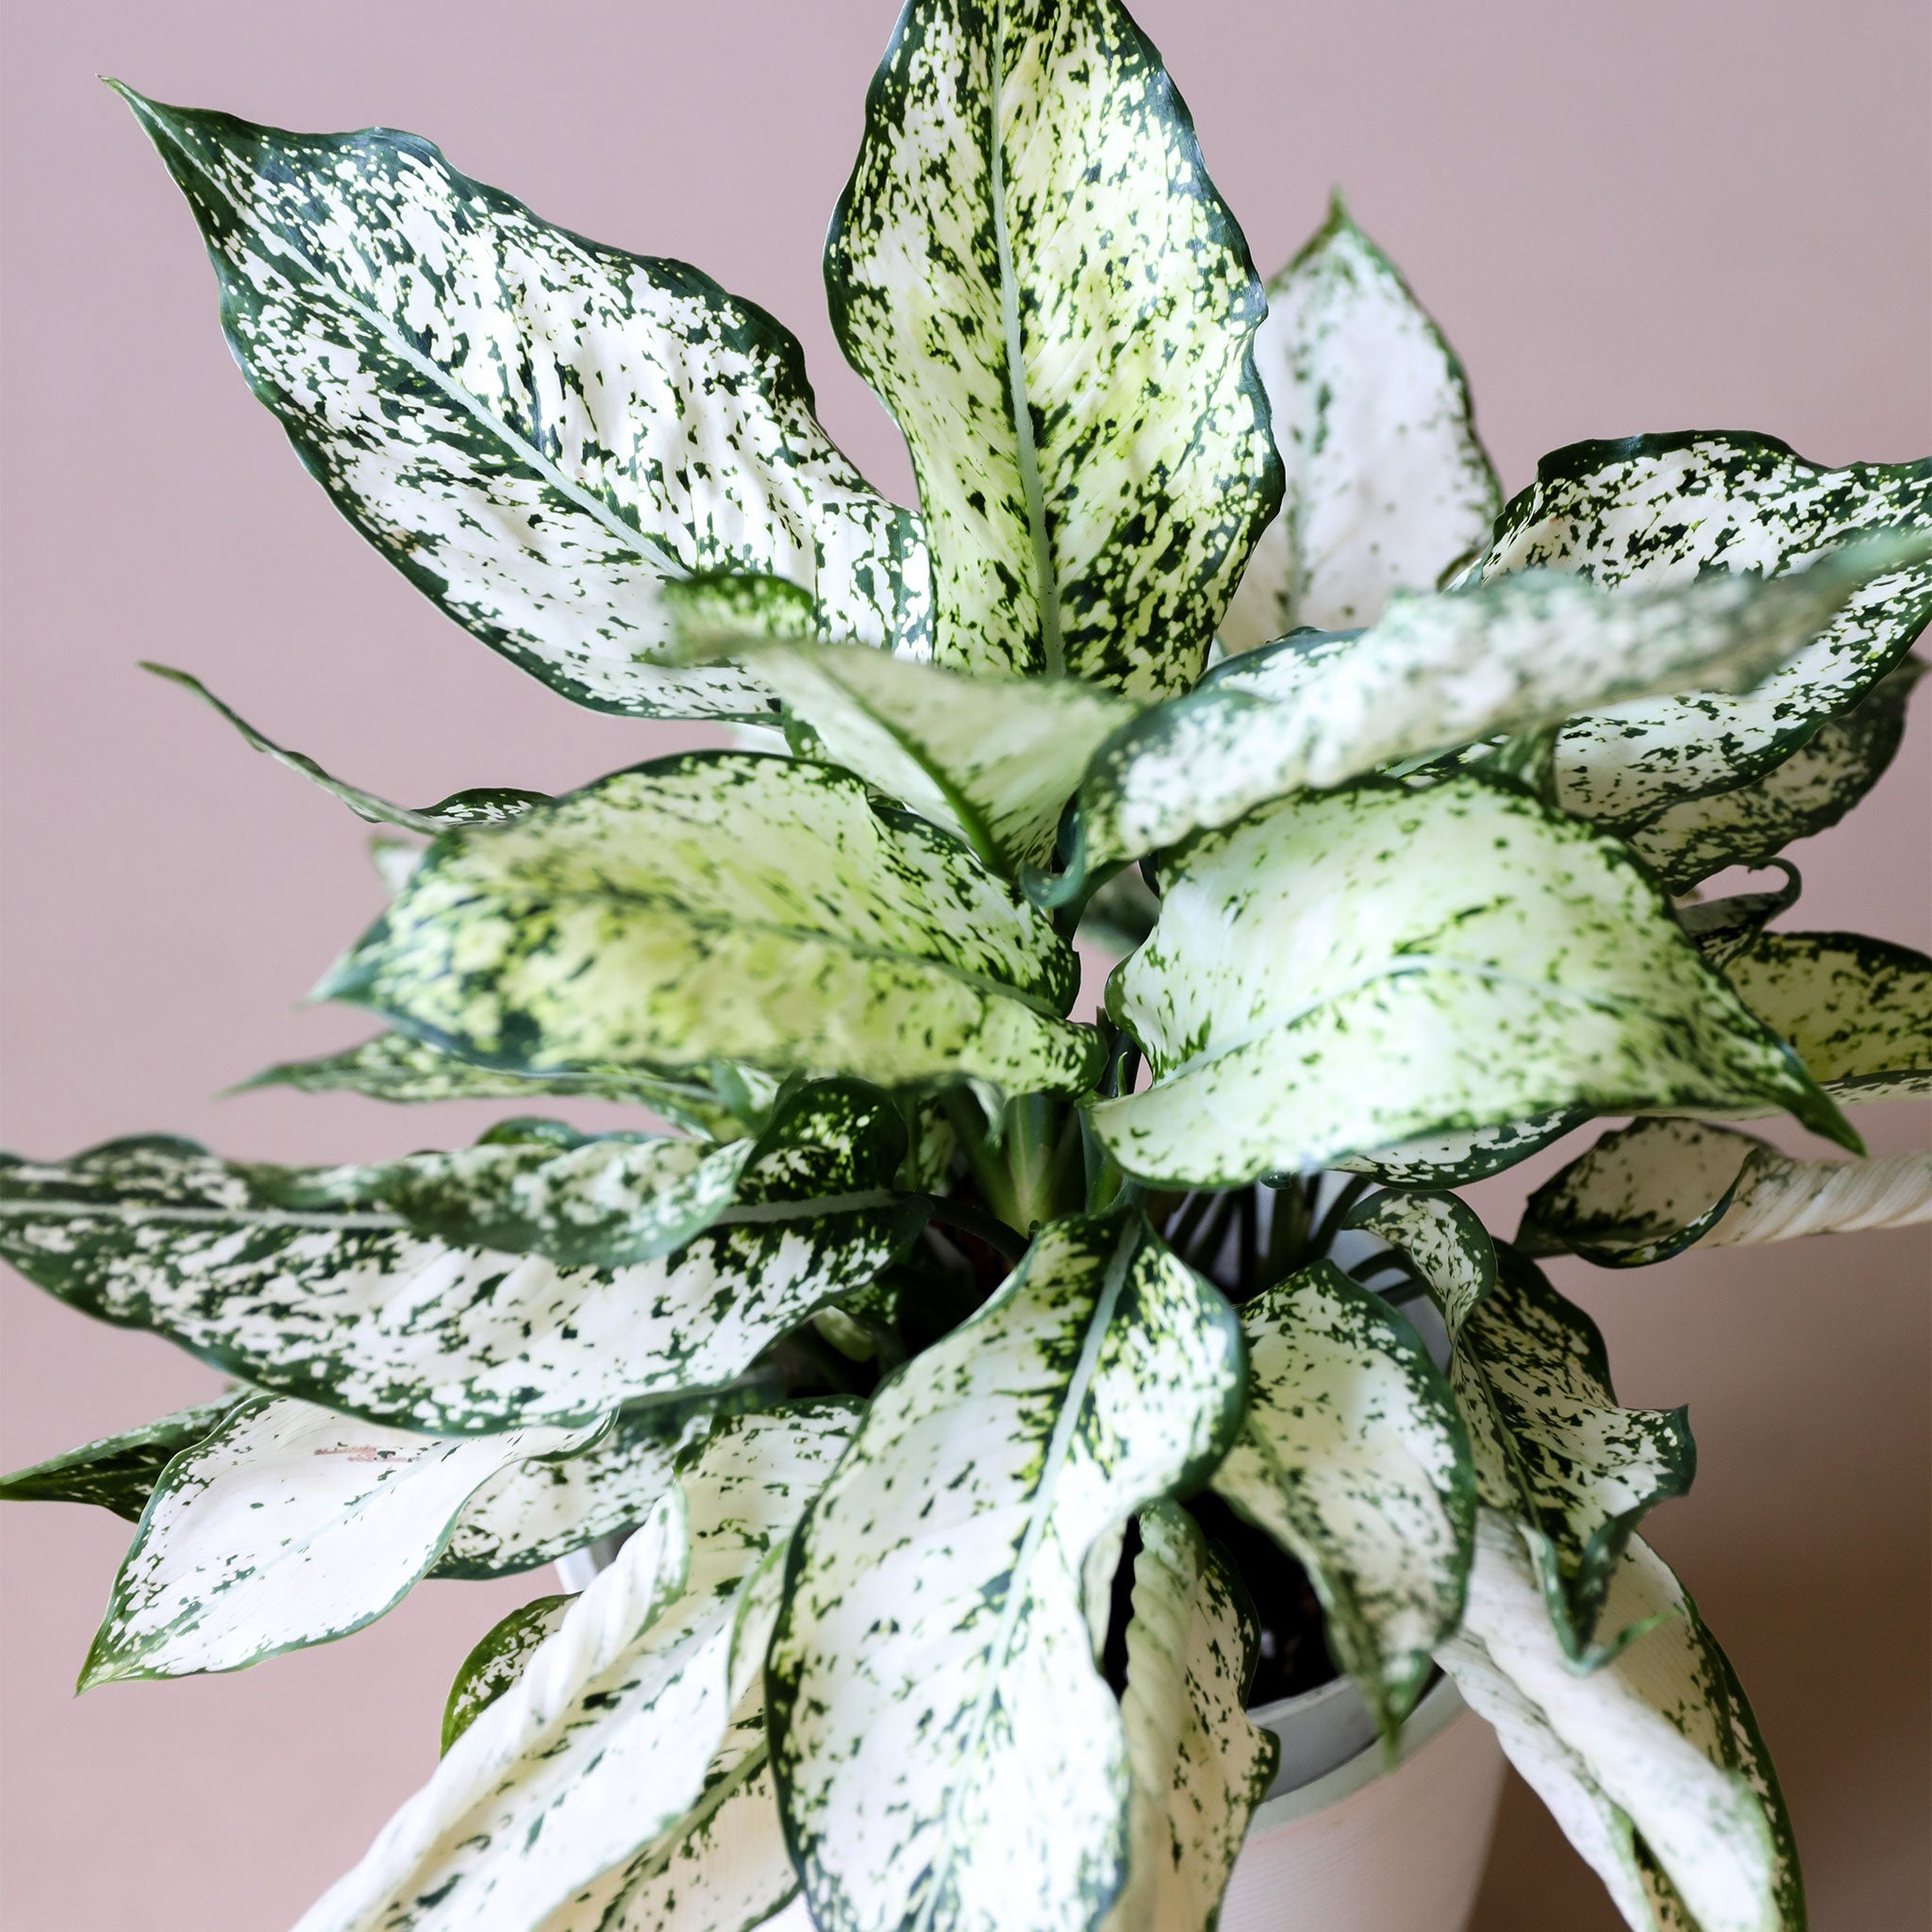 Upclose of the leaves of an Aglaonema First Diamond plant in a white pot. It has many spear shaped leaves speckled with light and dark green colors.